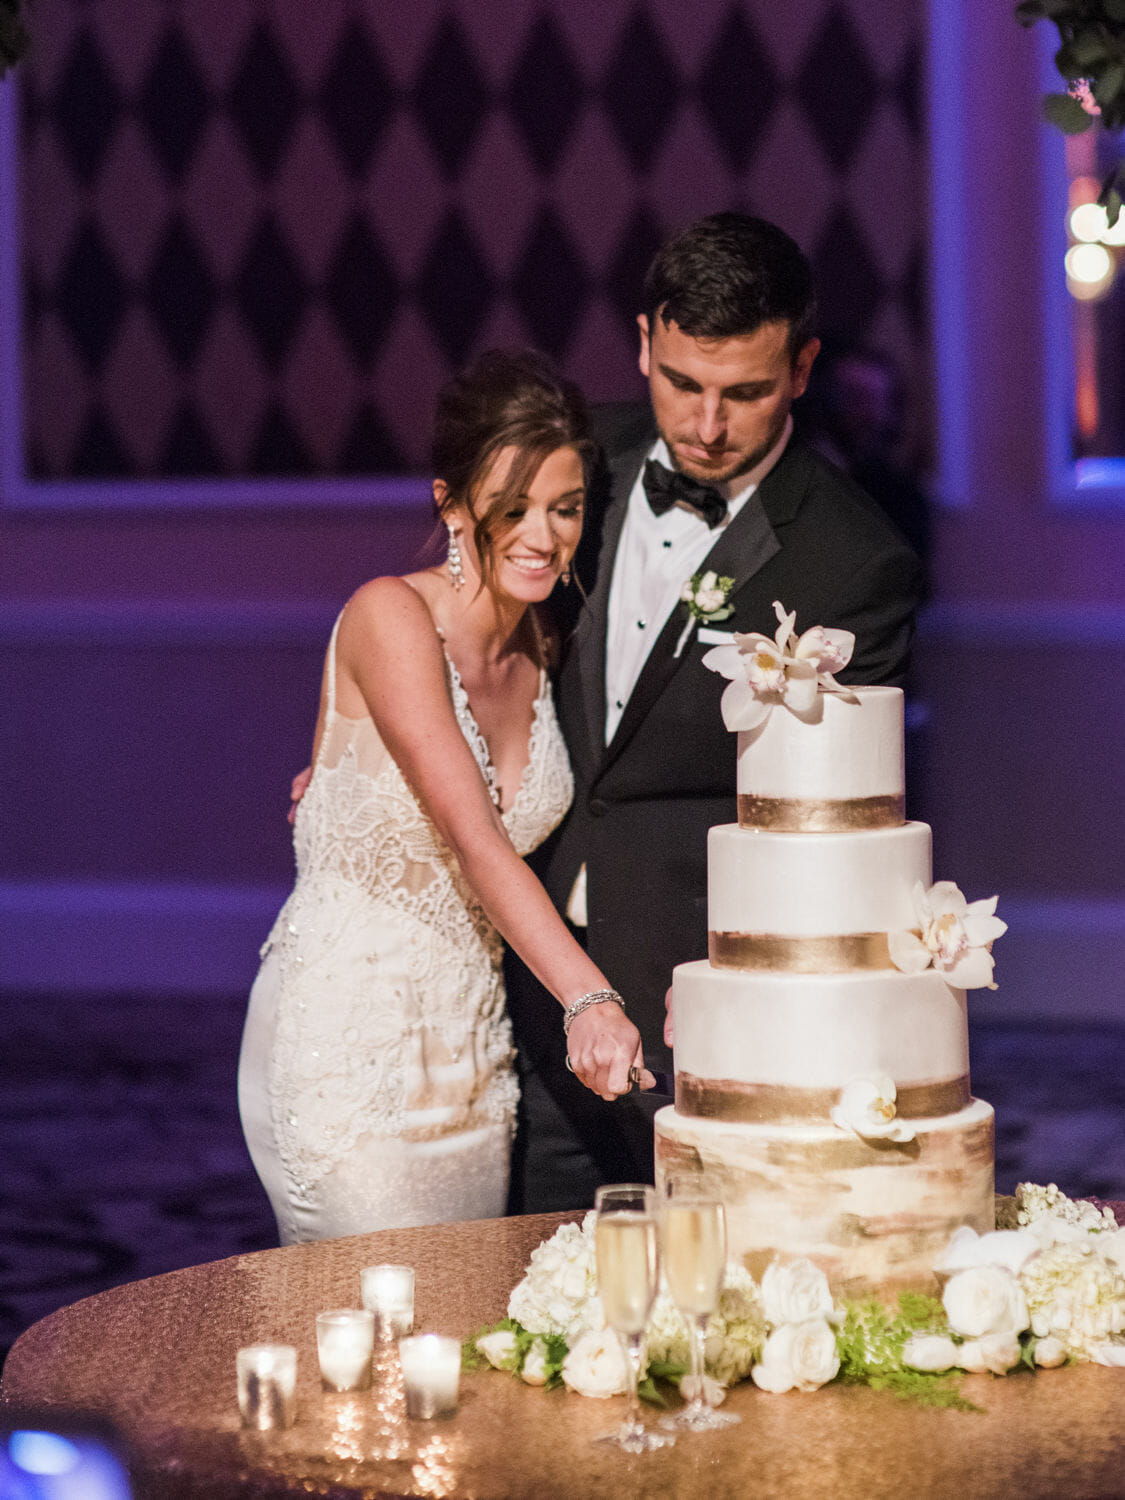 Jade Roper and Tanner Tolbert cutting their wedding cake at their reception